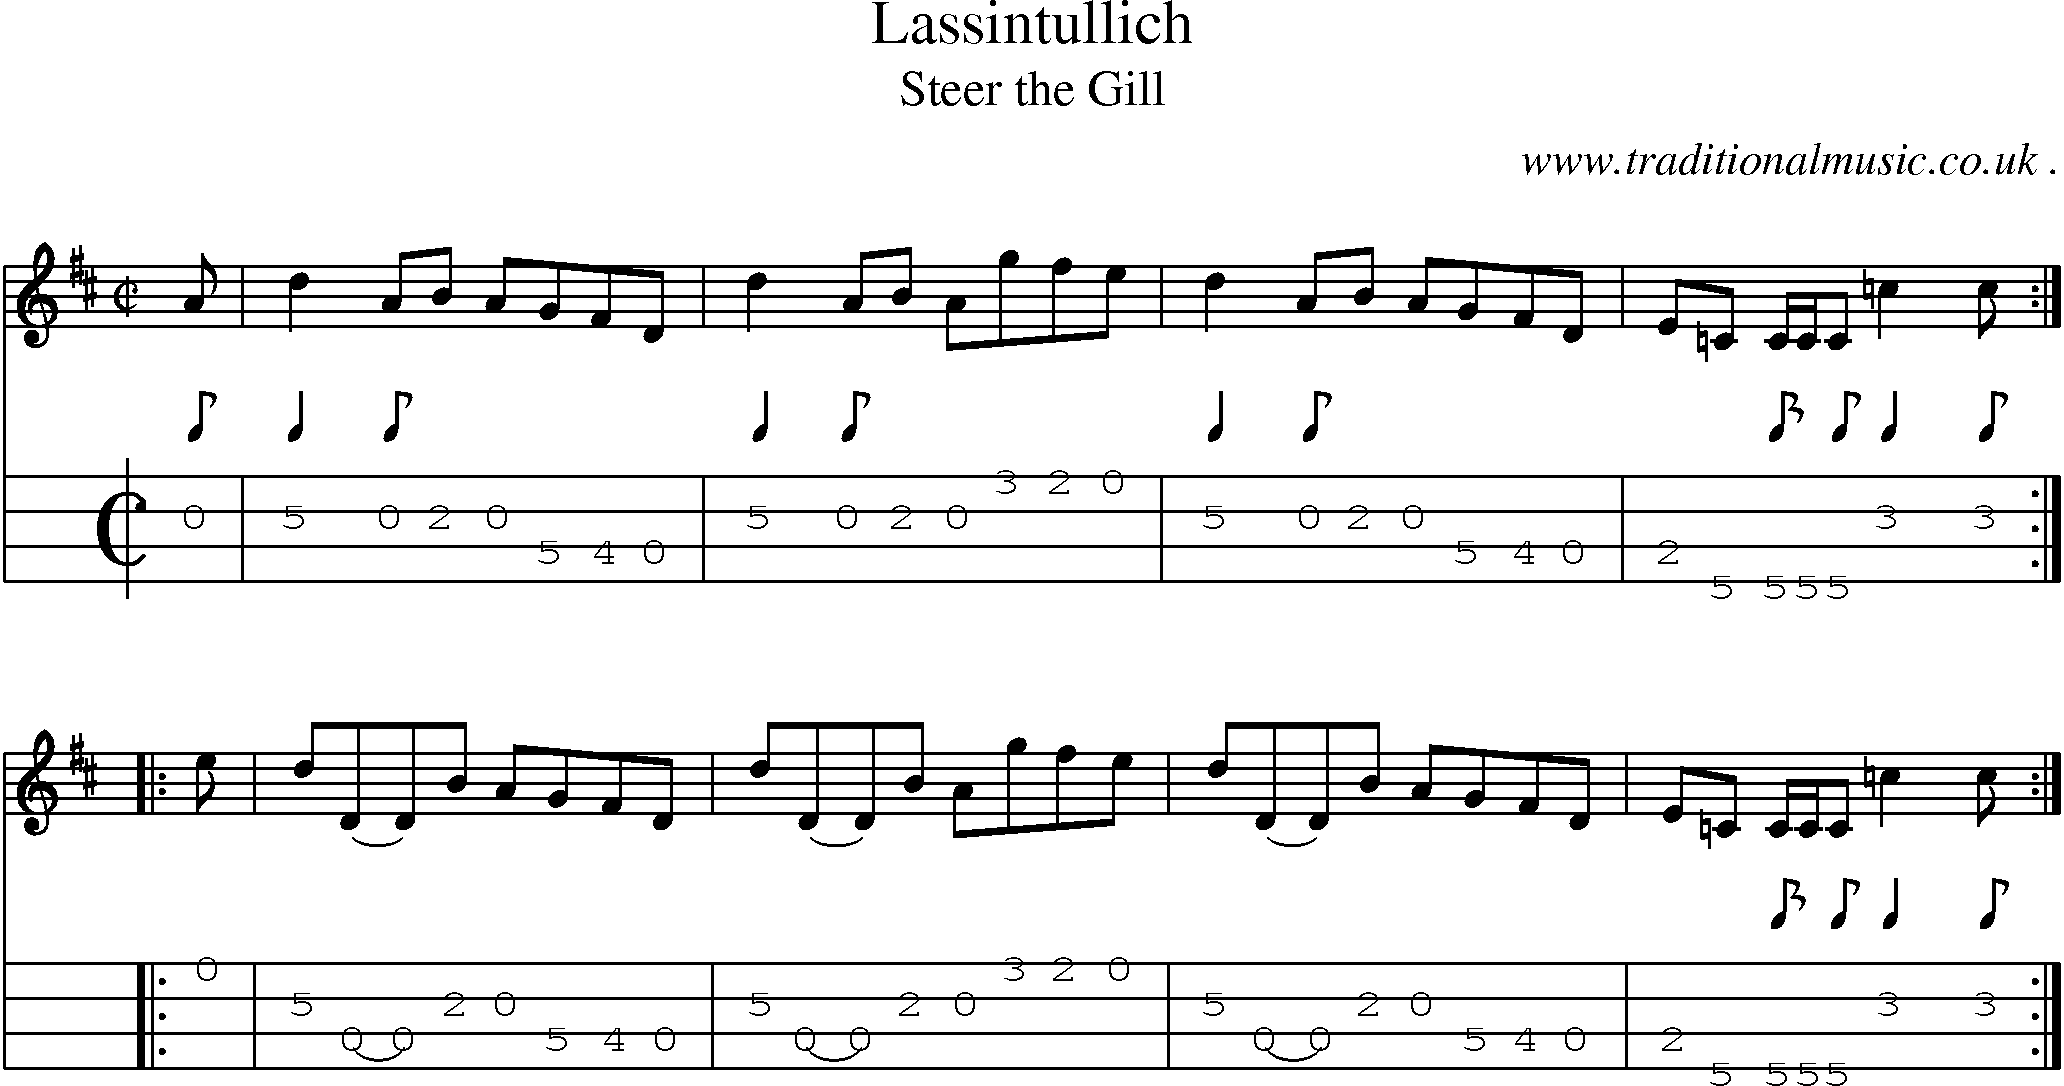 Sheet-music  score, Chords and Mandolin Tabs for Lassintullich